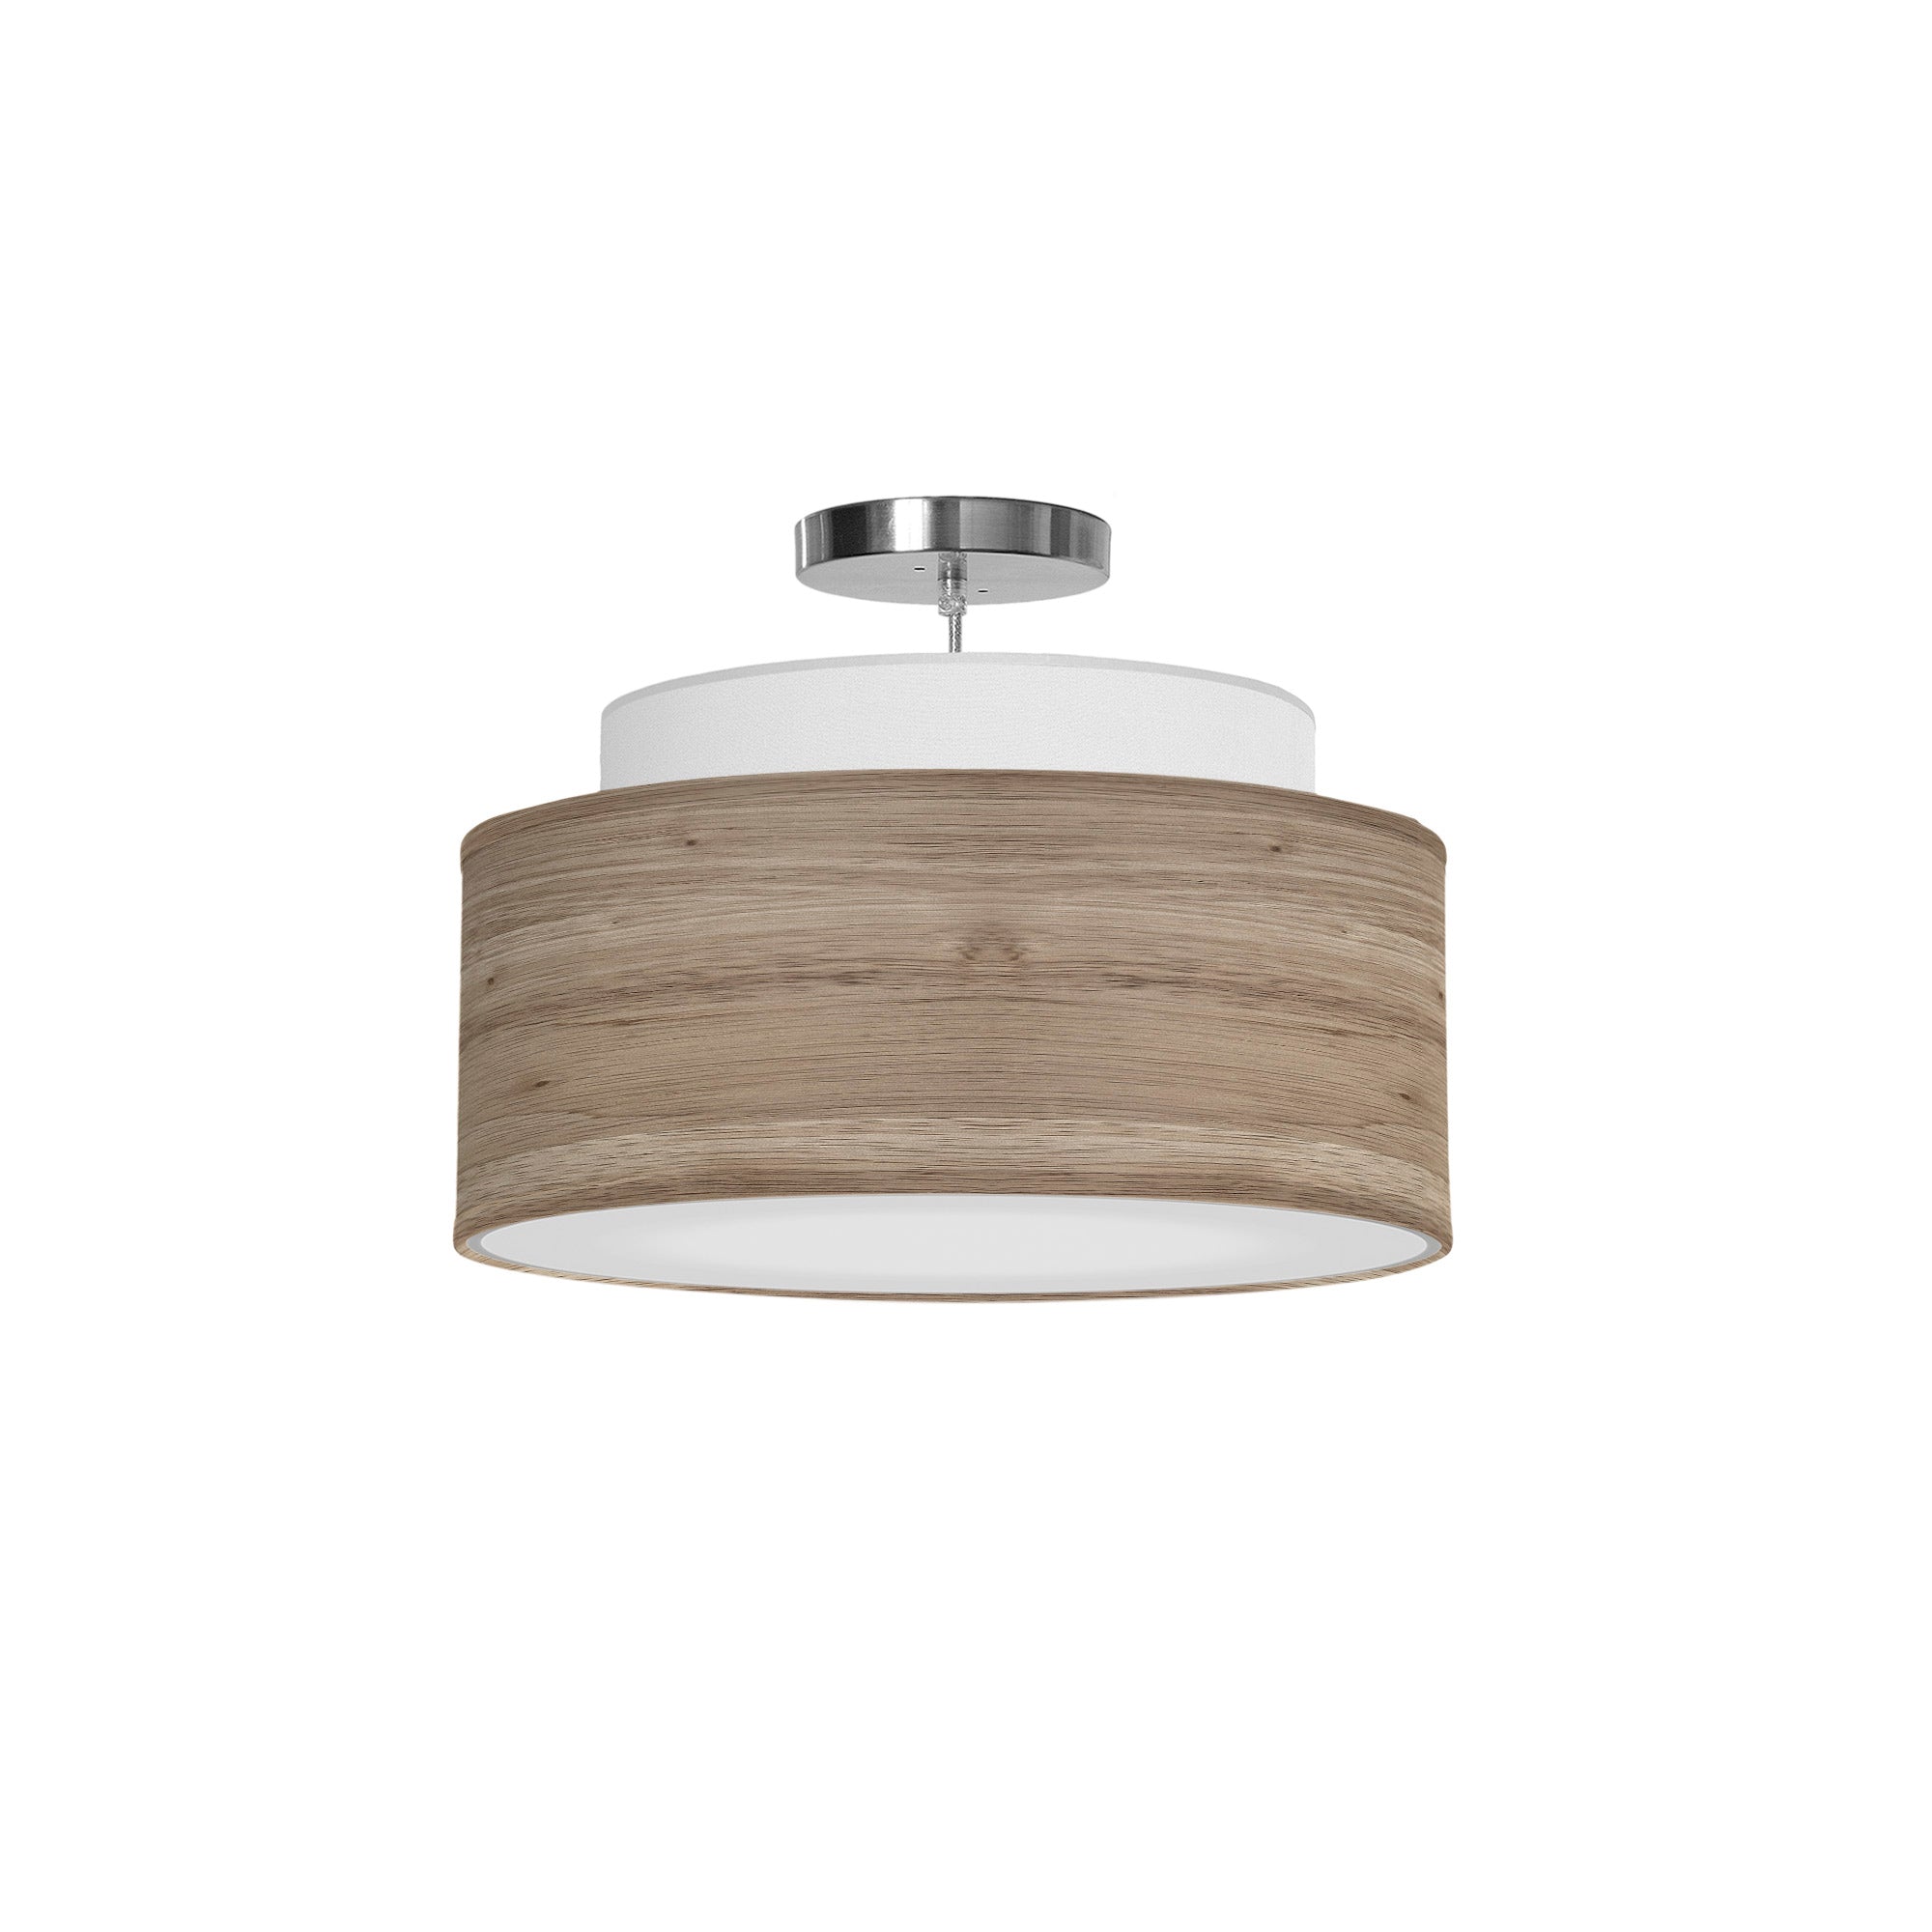 The Elsa Hanging Lamp from Seascape Fixtures with a photo veneer shade in natural color.